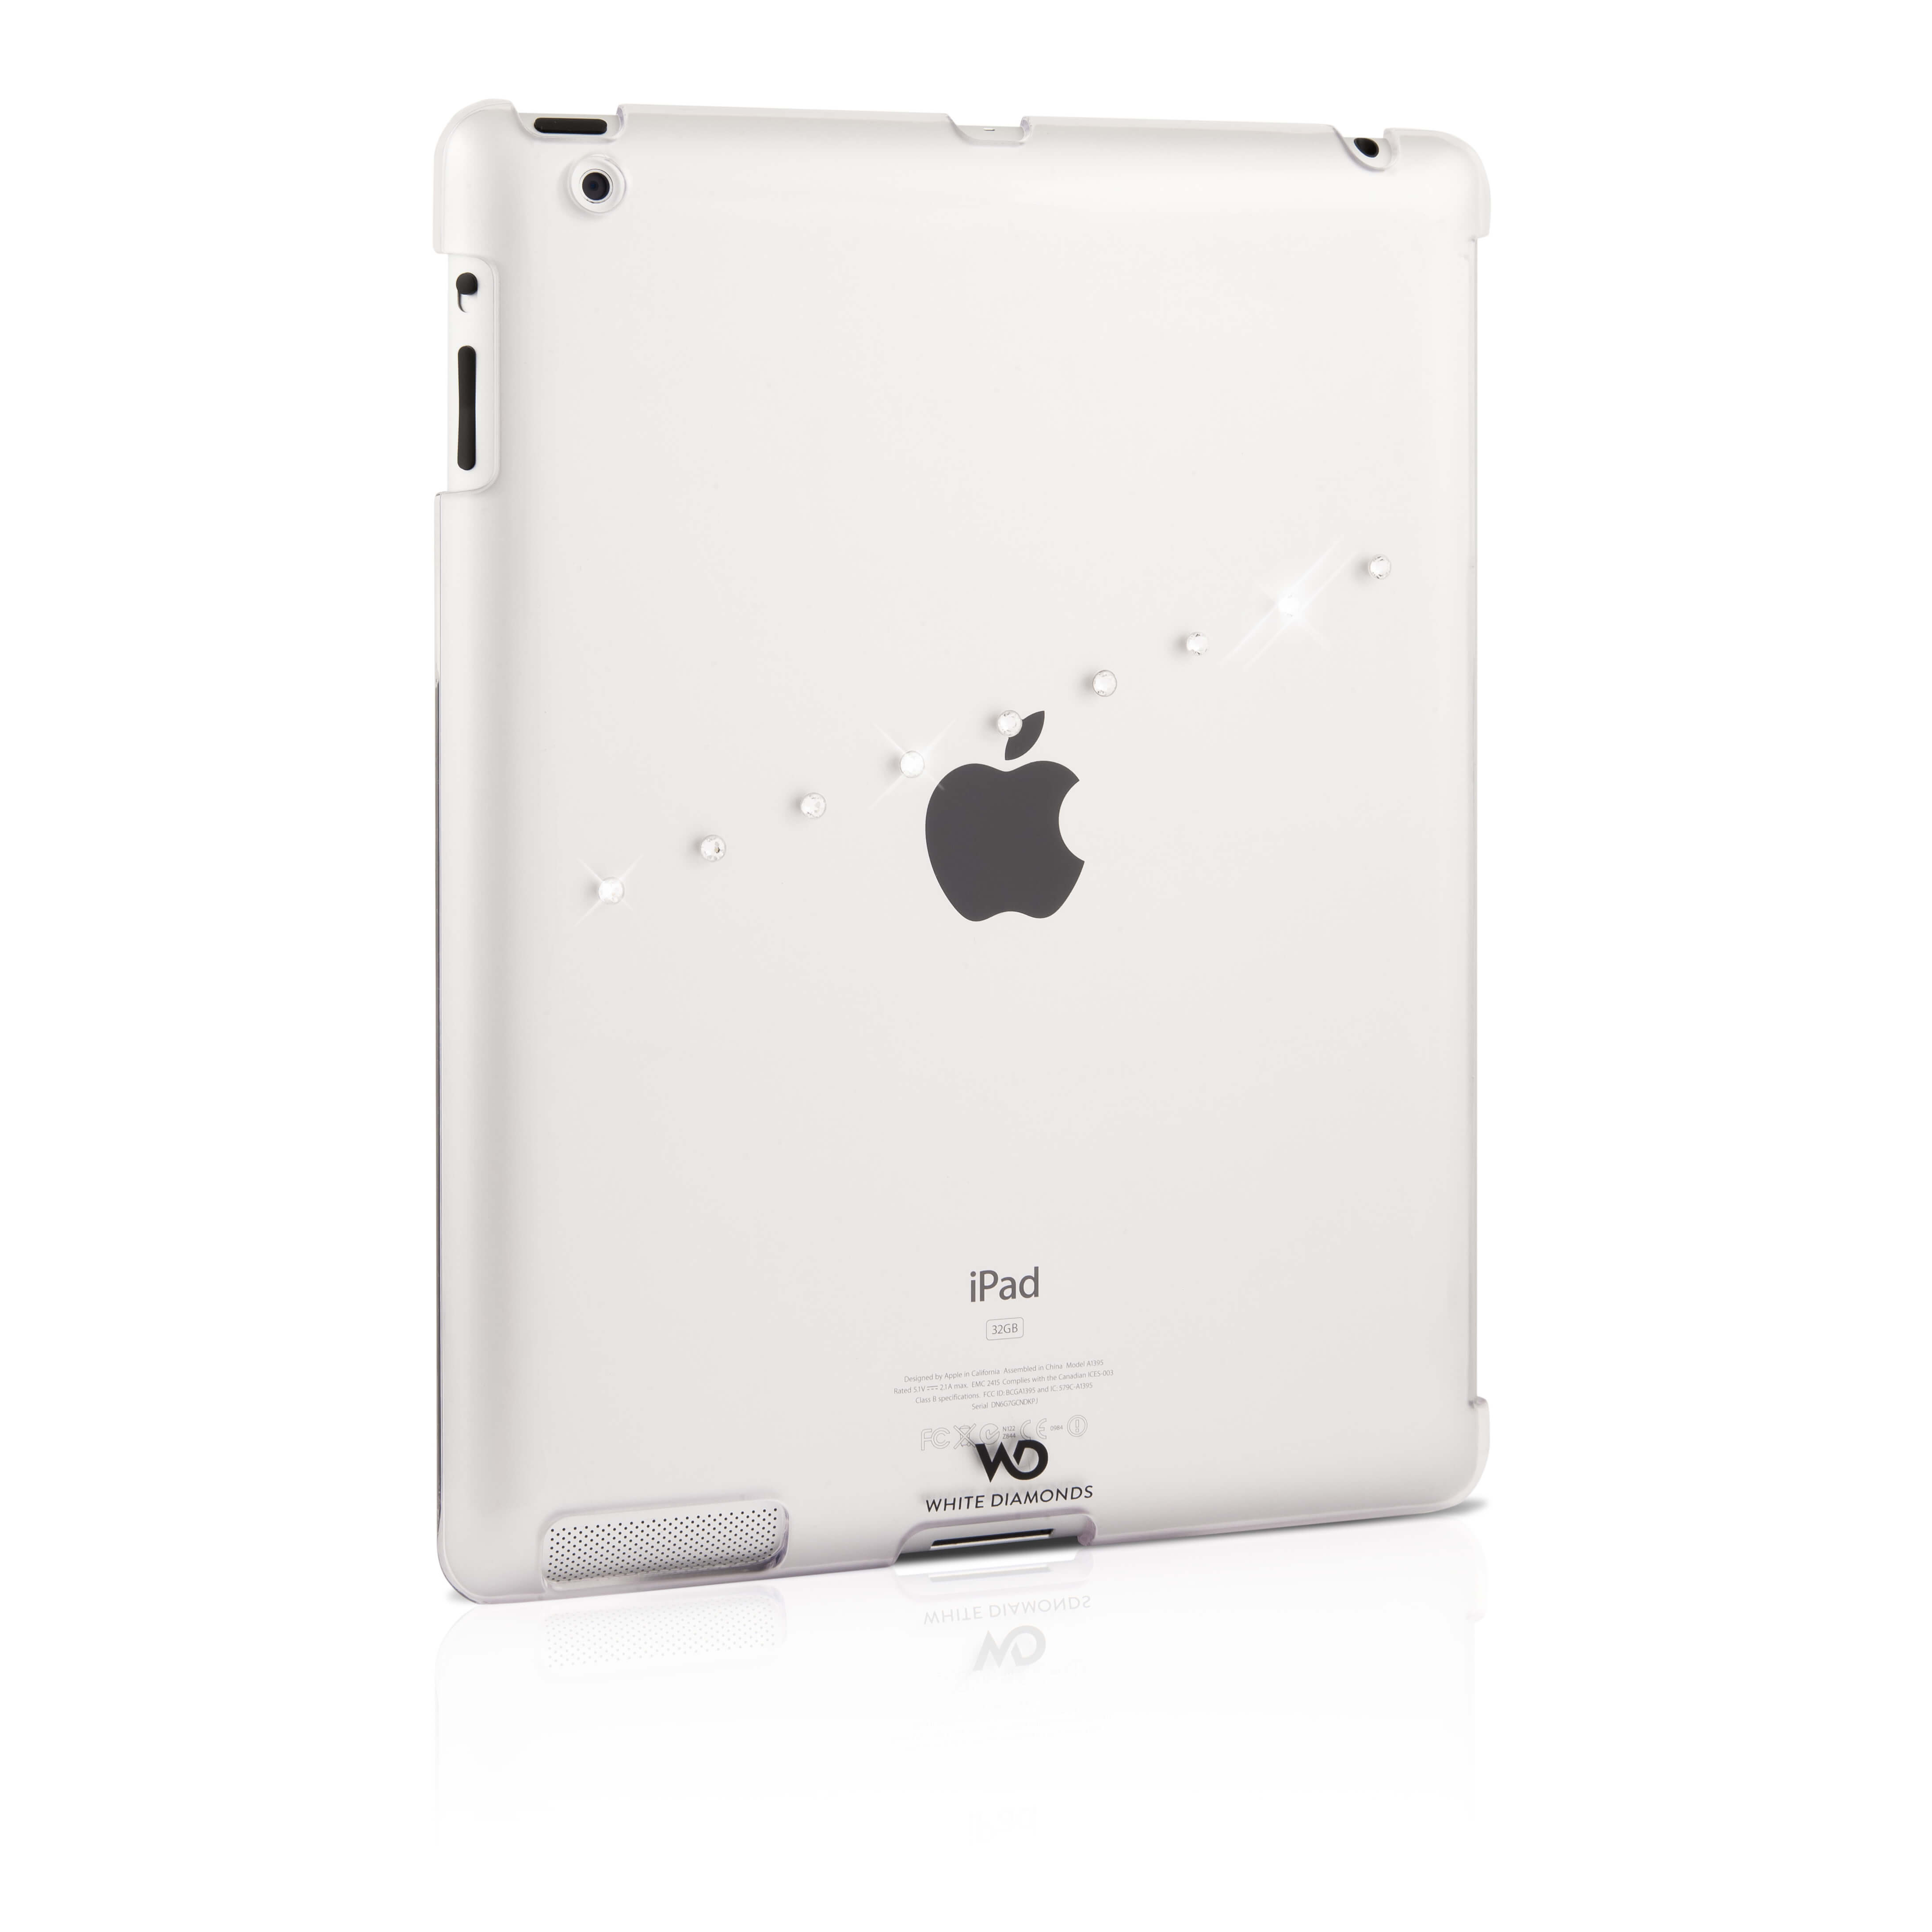 Sash Cover for iPad 3rd/4th G eneration, white